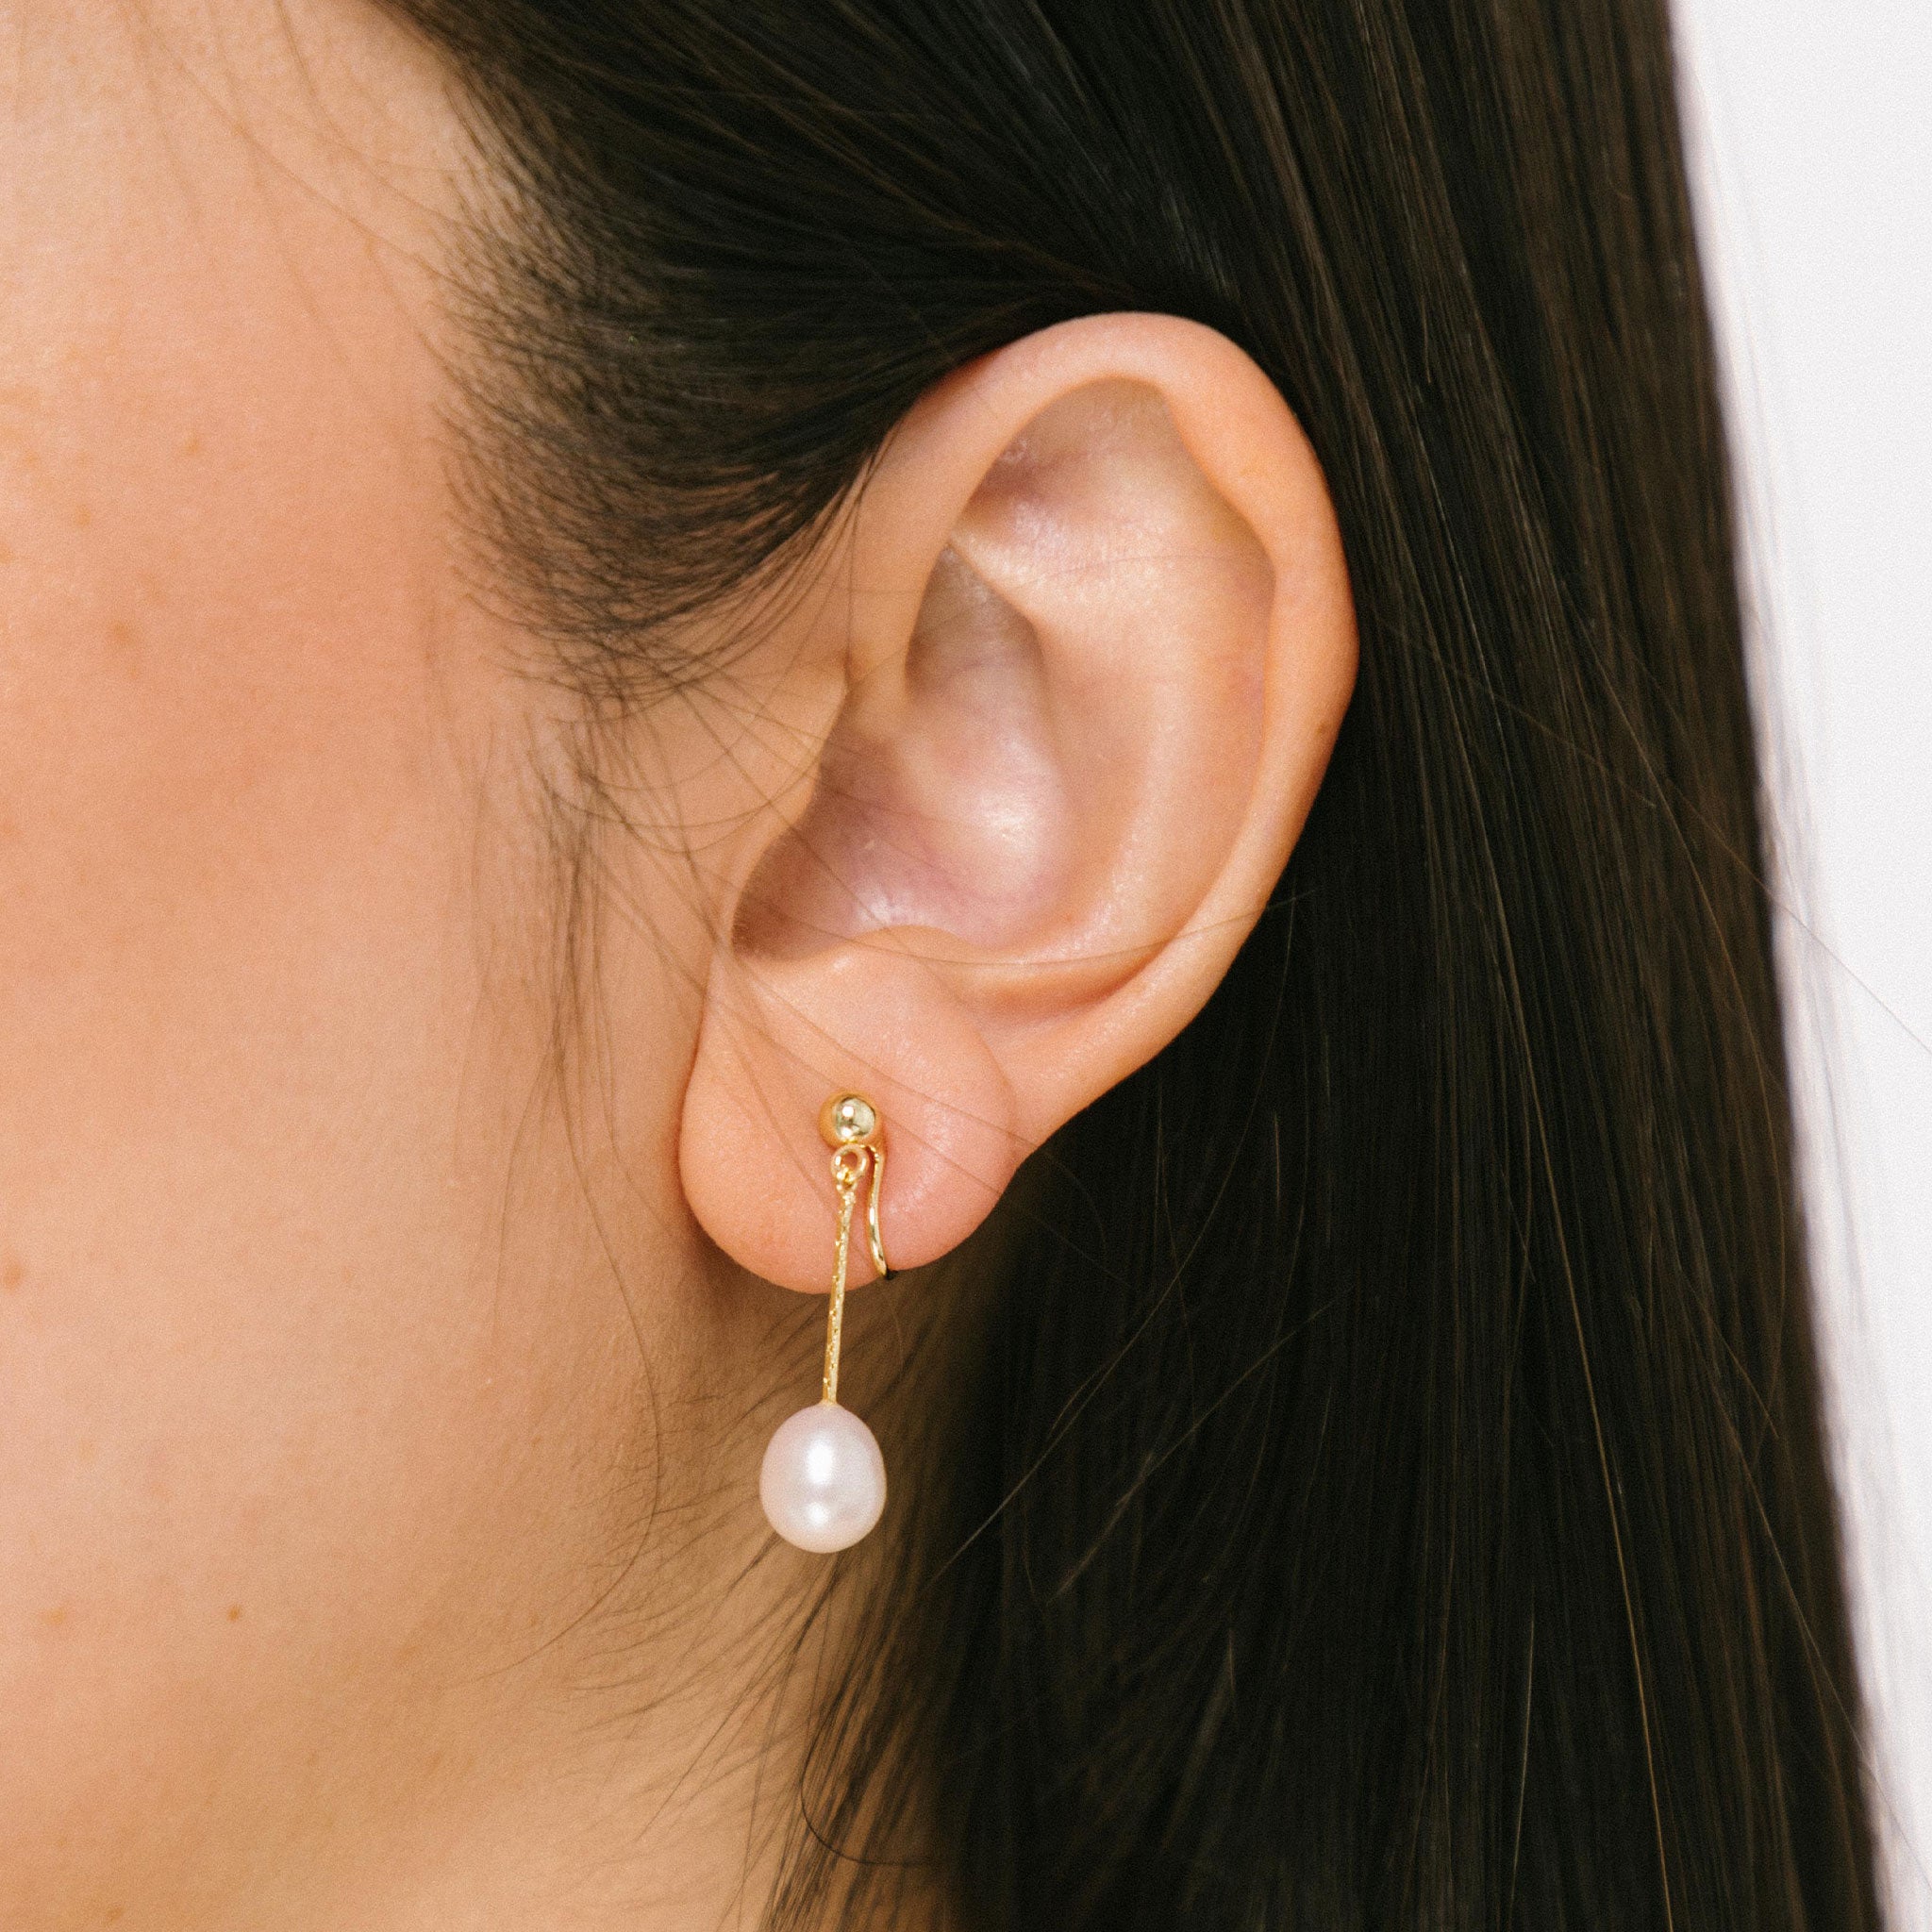 Sophisticated gold-plated clip-on earrings showcasing lustrous freshwater pearls. Suitable for all ear types, including thick and small ears. Can be worn comfortably for up to 24 hours. 